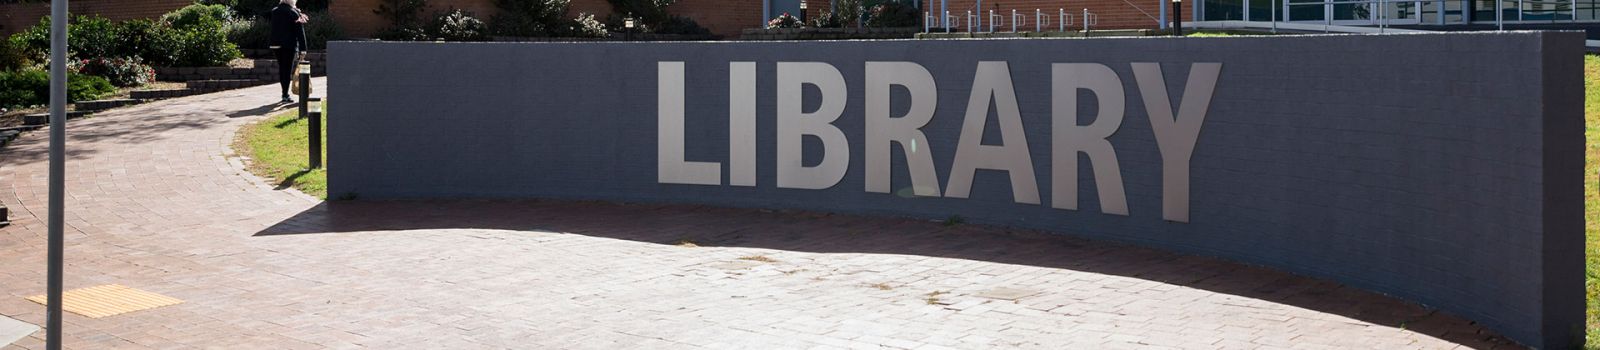 Image of the library banner outside Raymond Terrace Library banner image